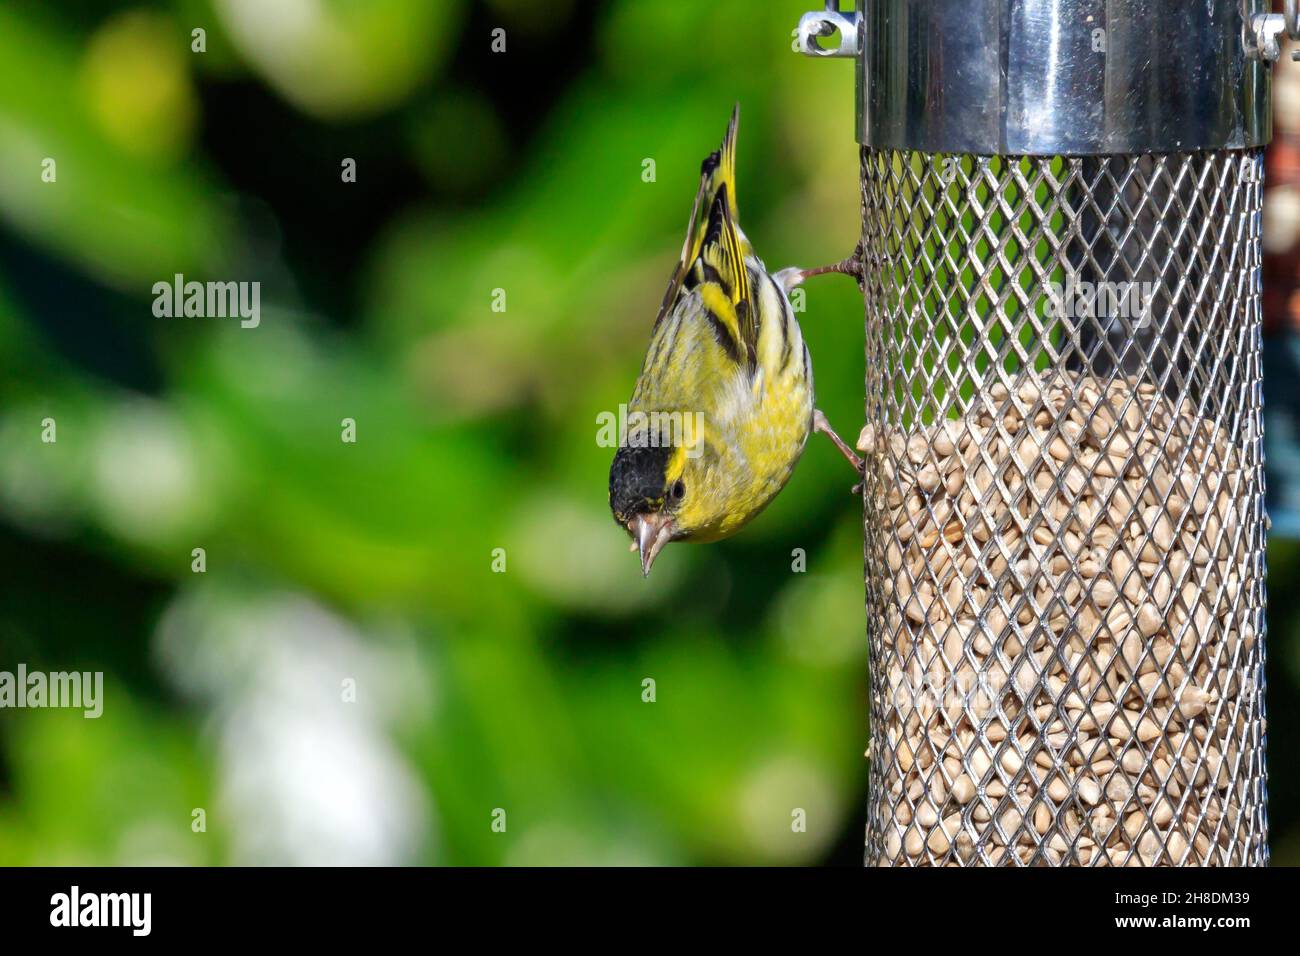 Siskin feeding from a bird feeder filled with Sunflower seeds Stock Photo